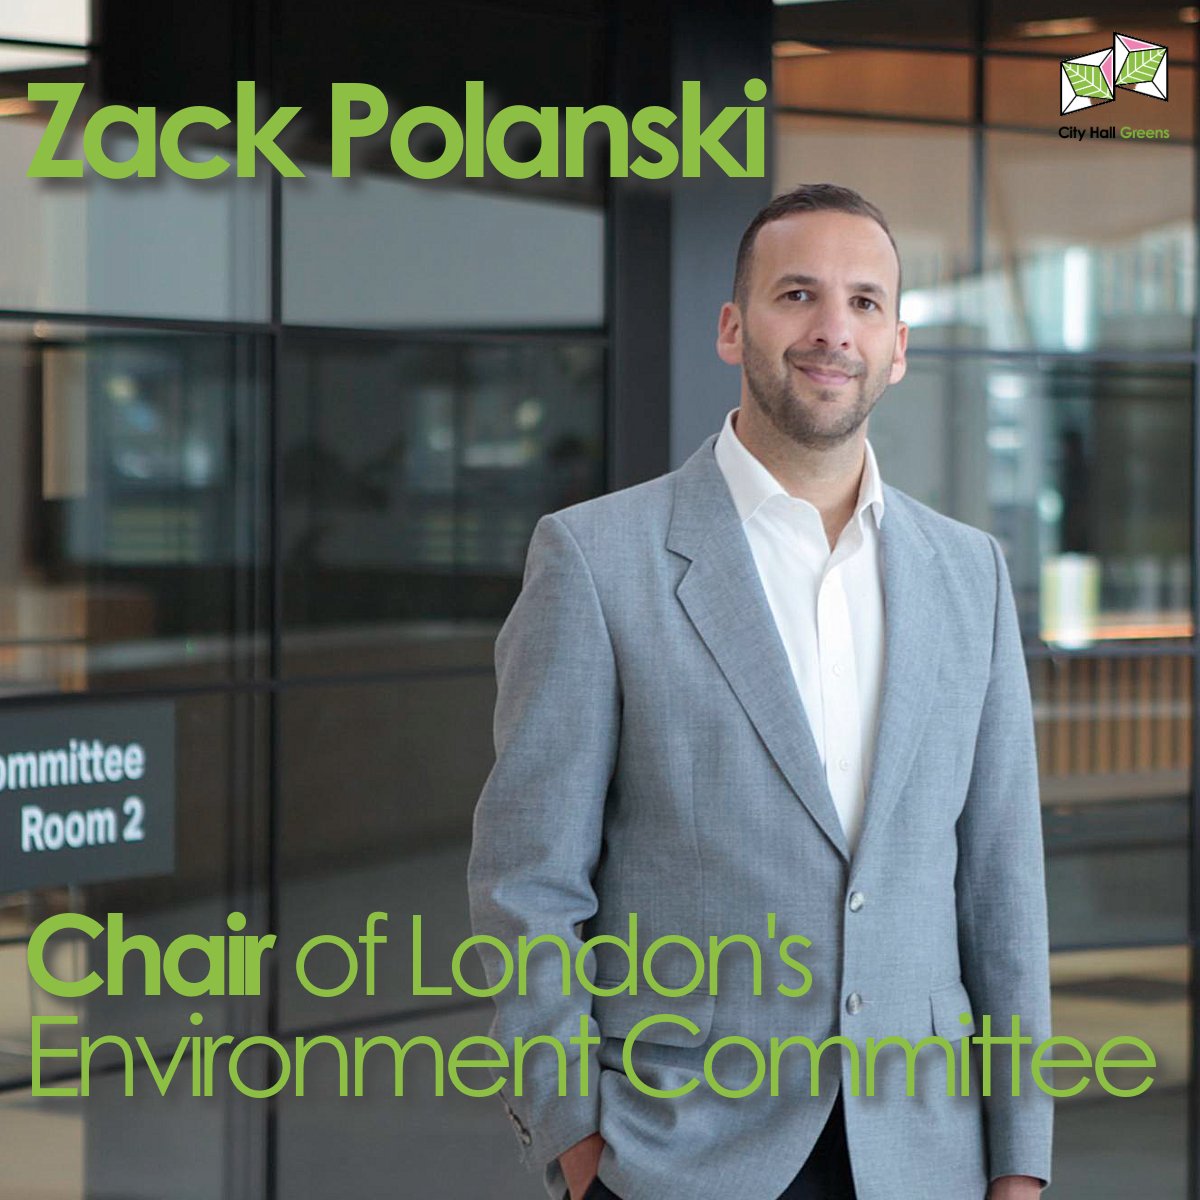 Delighted today to have been elected to be the Chair of London's Environment committee. The climate & ecological emergency will continue to hit the most marginalised communities hardest. We must work for environmental justice with social, racial & economic justice. Lots to do!